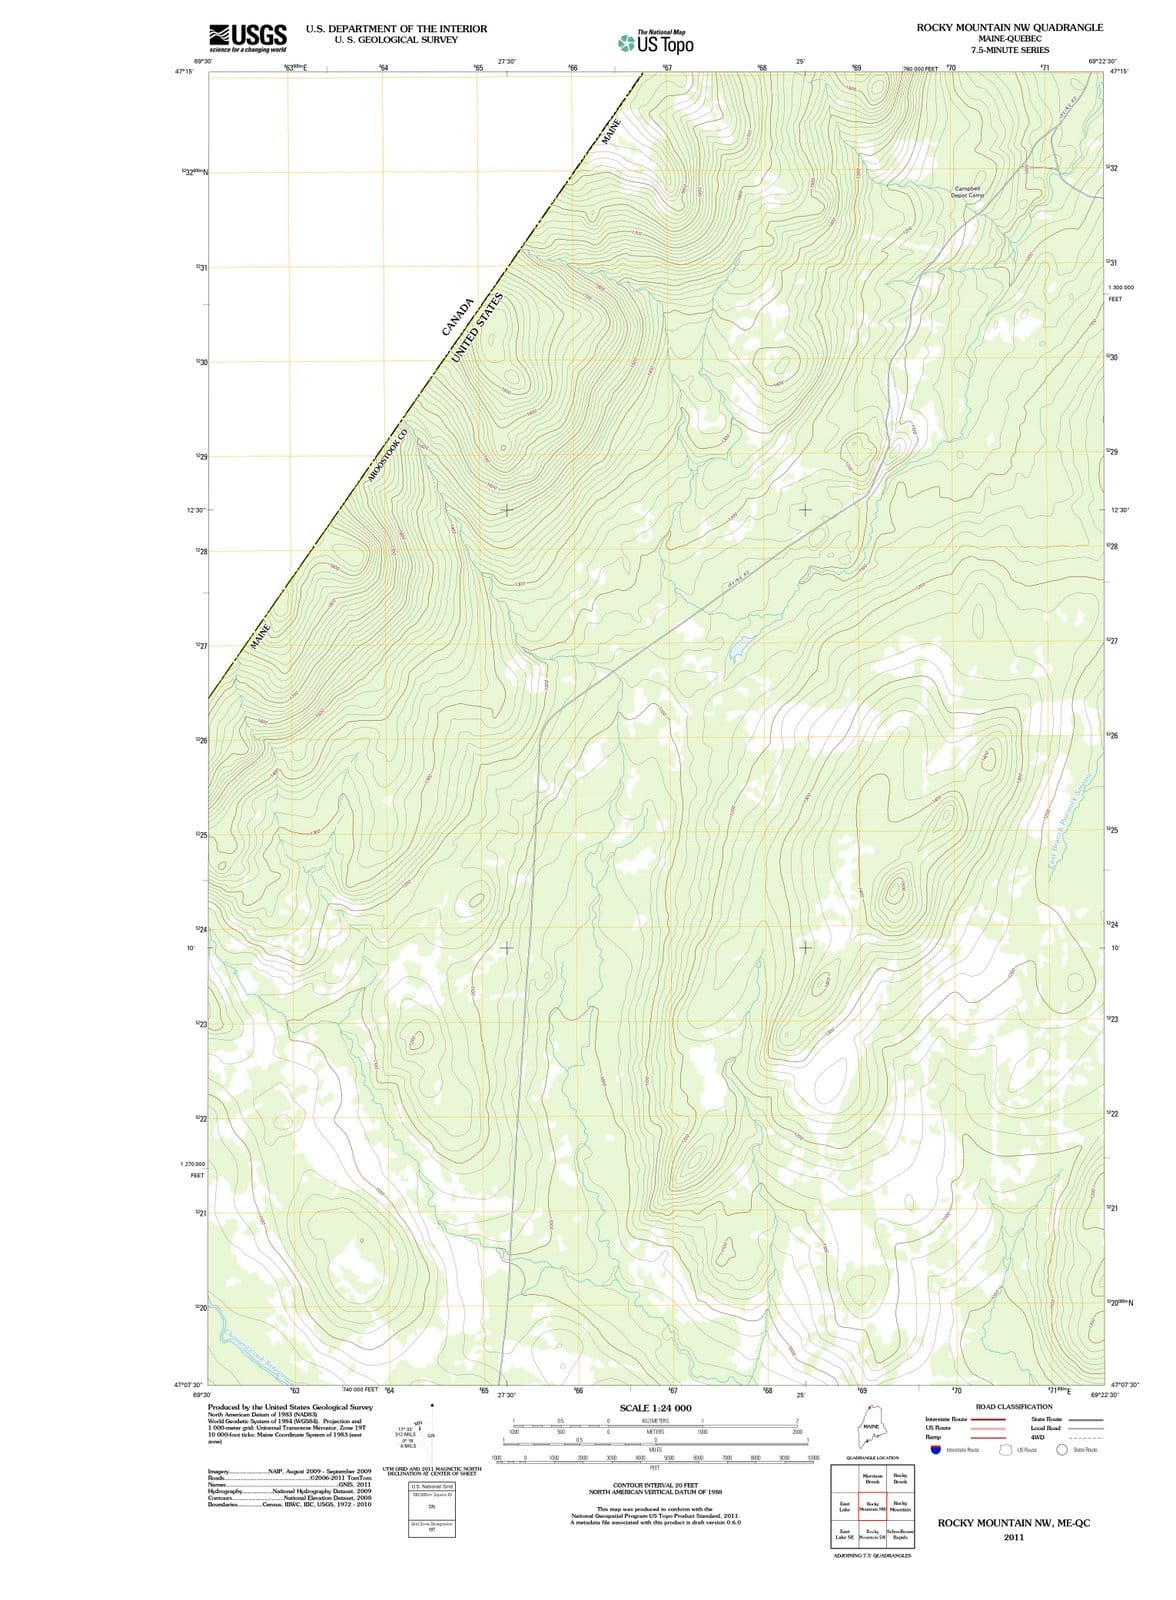 2011 Rocky Mountain, ME - Maine - USGS Topographic Map v2